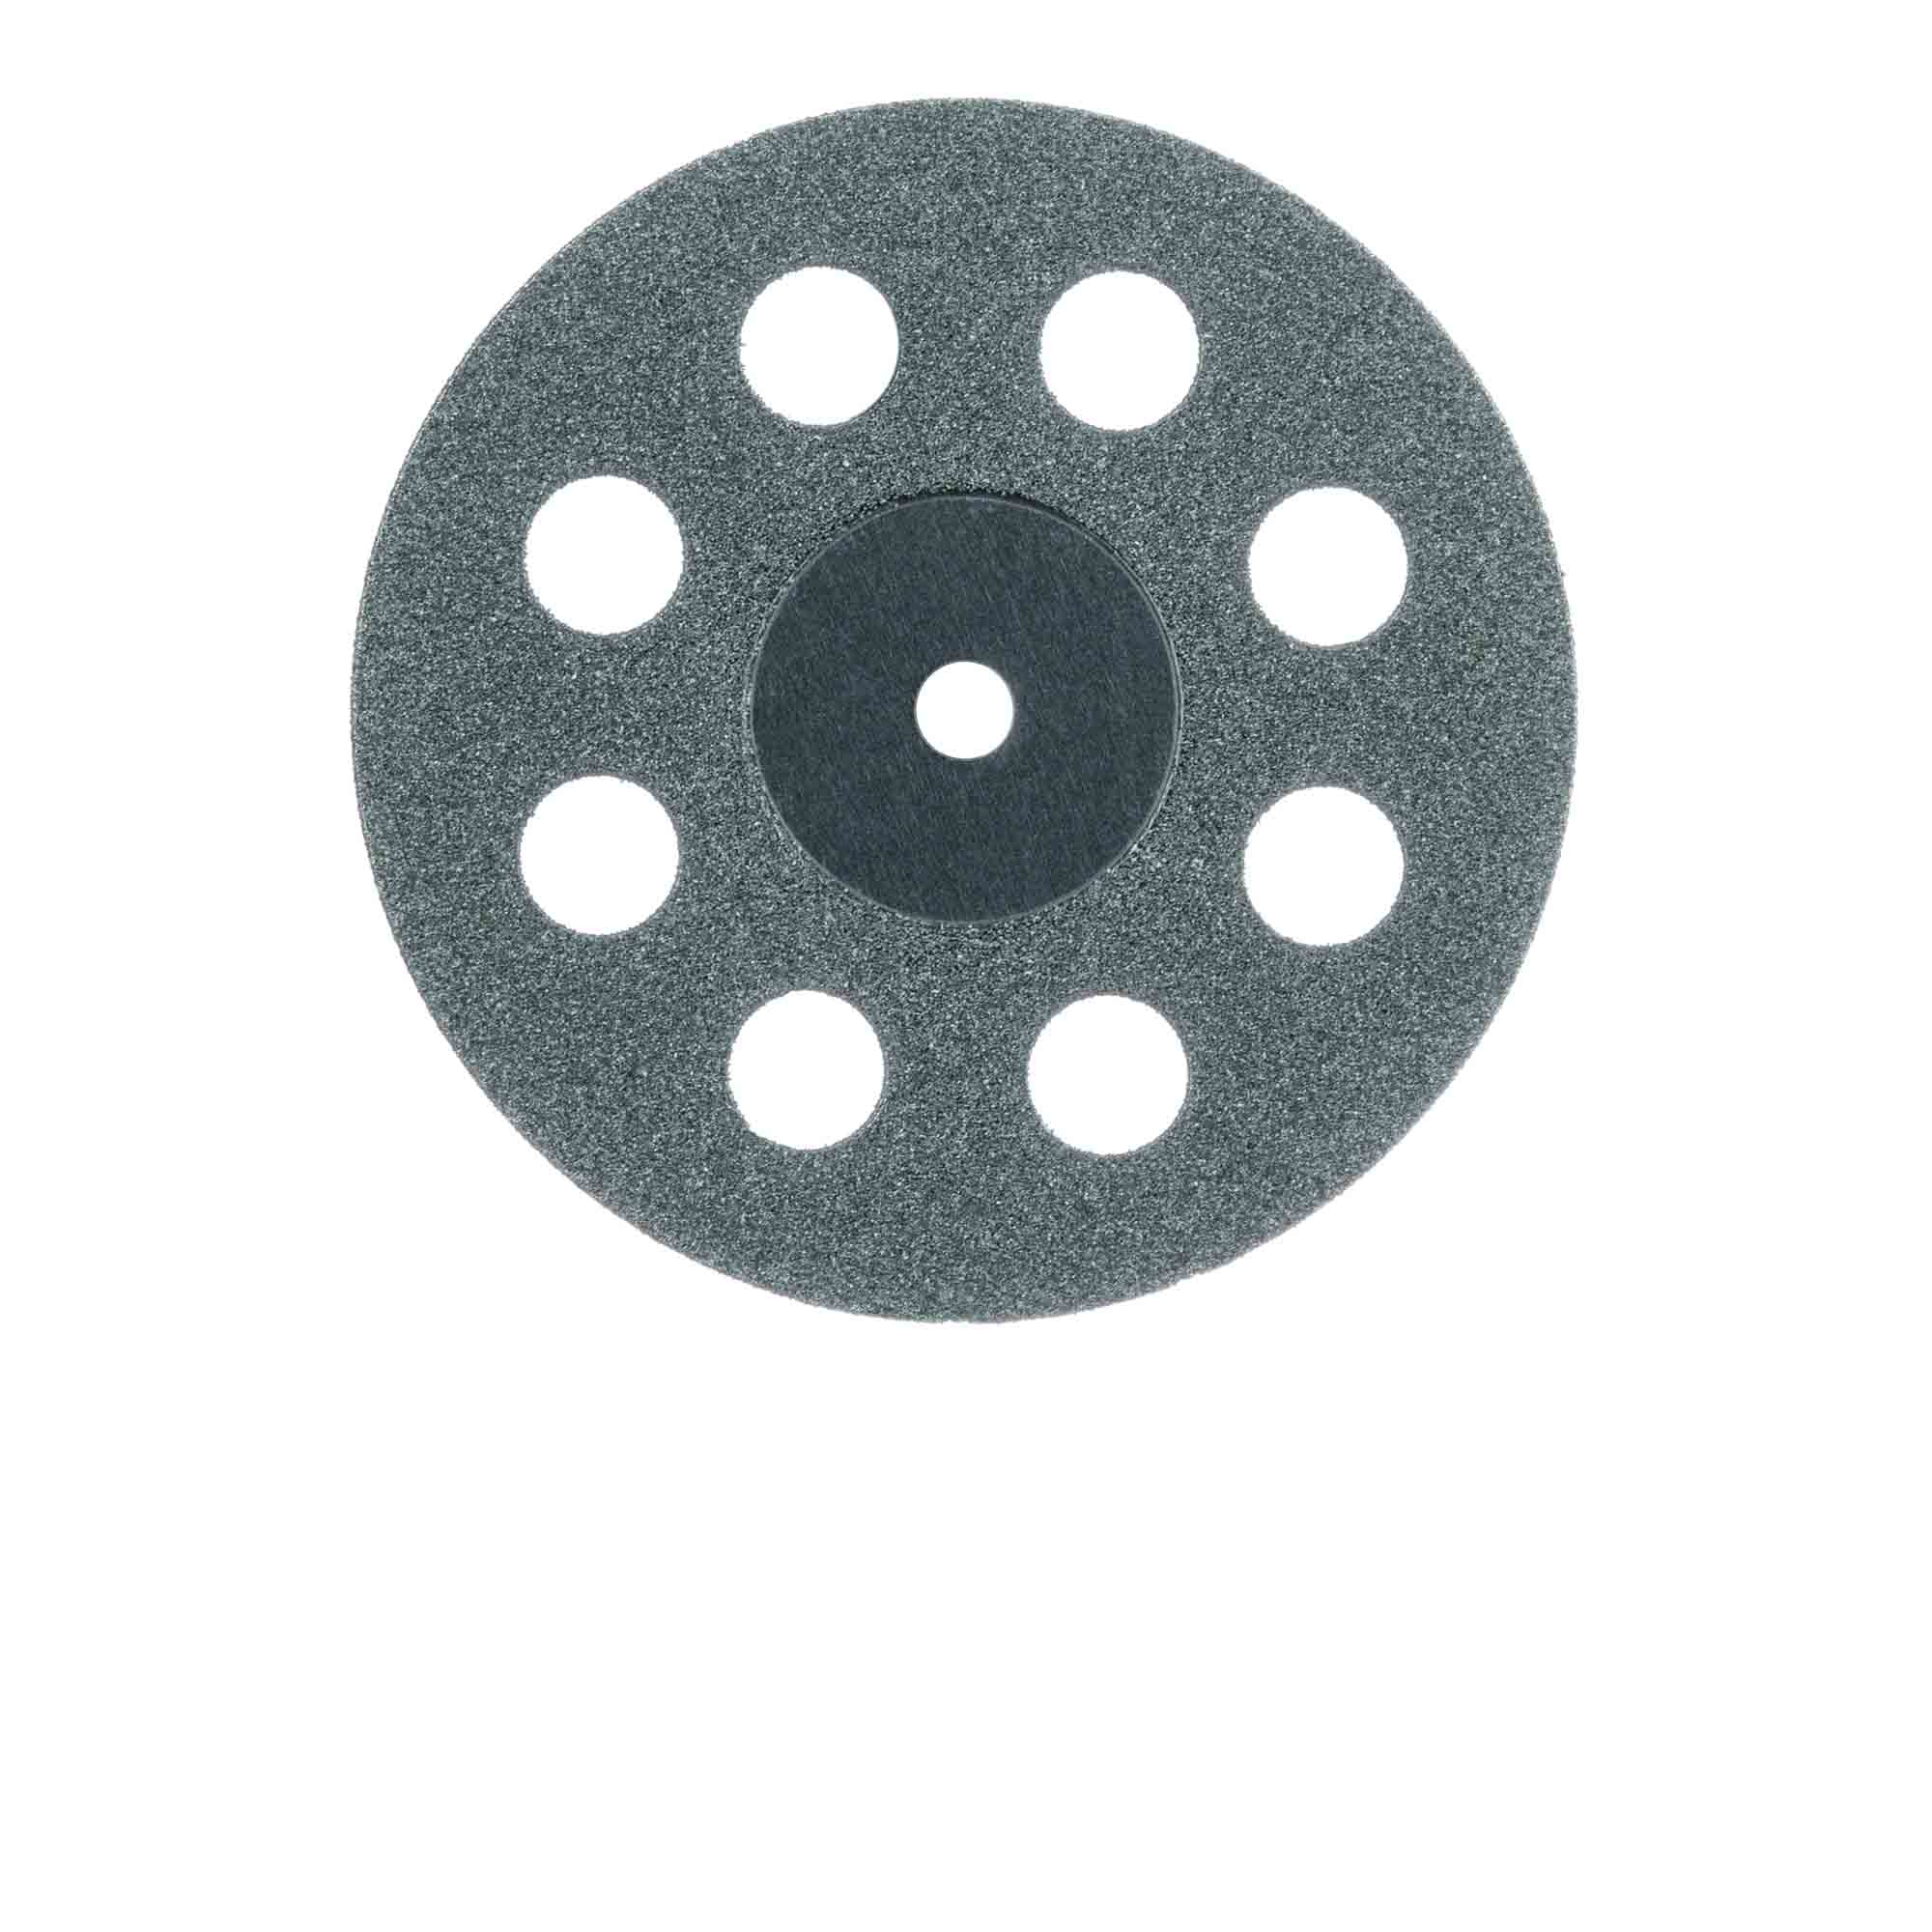 932DF-220-HP Diamond Bur, Perforated Disc, Double Sided, 0.25mm thick, 22 mm Diameter, Fine HP